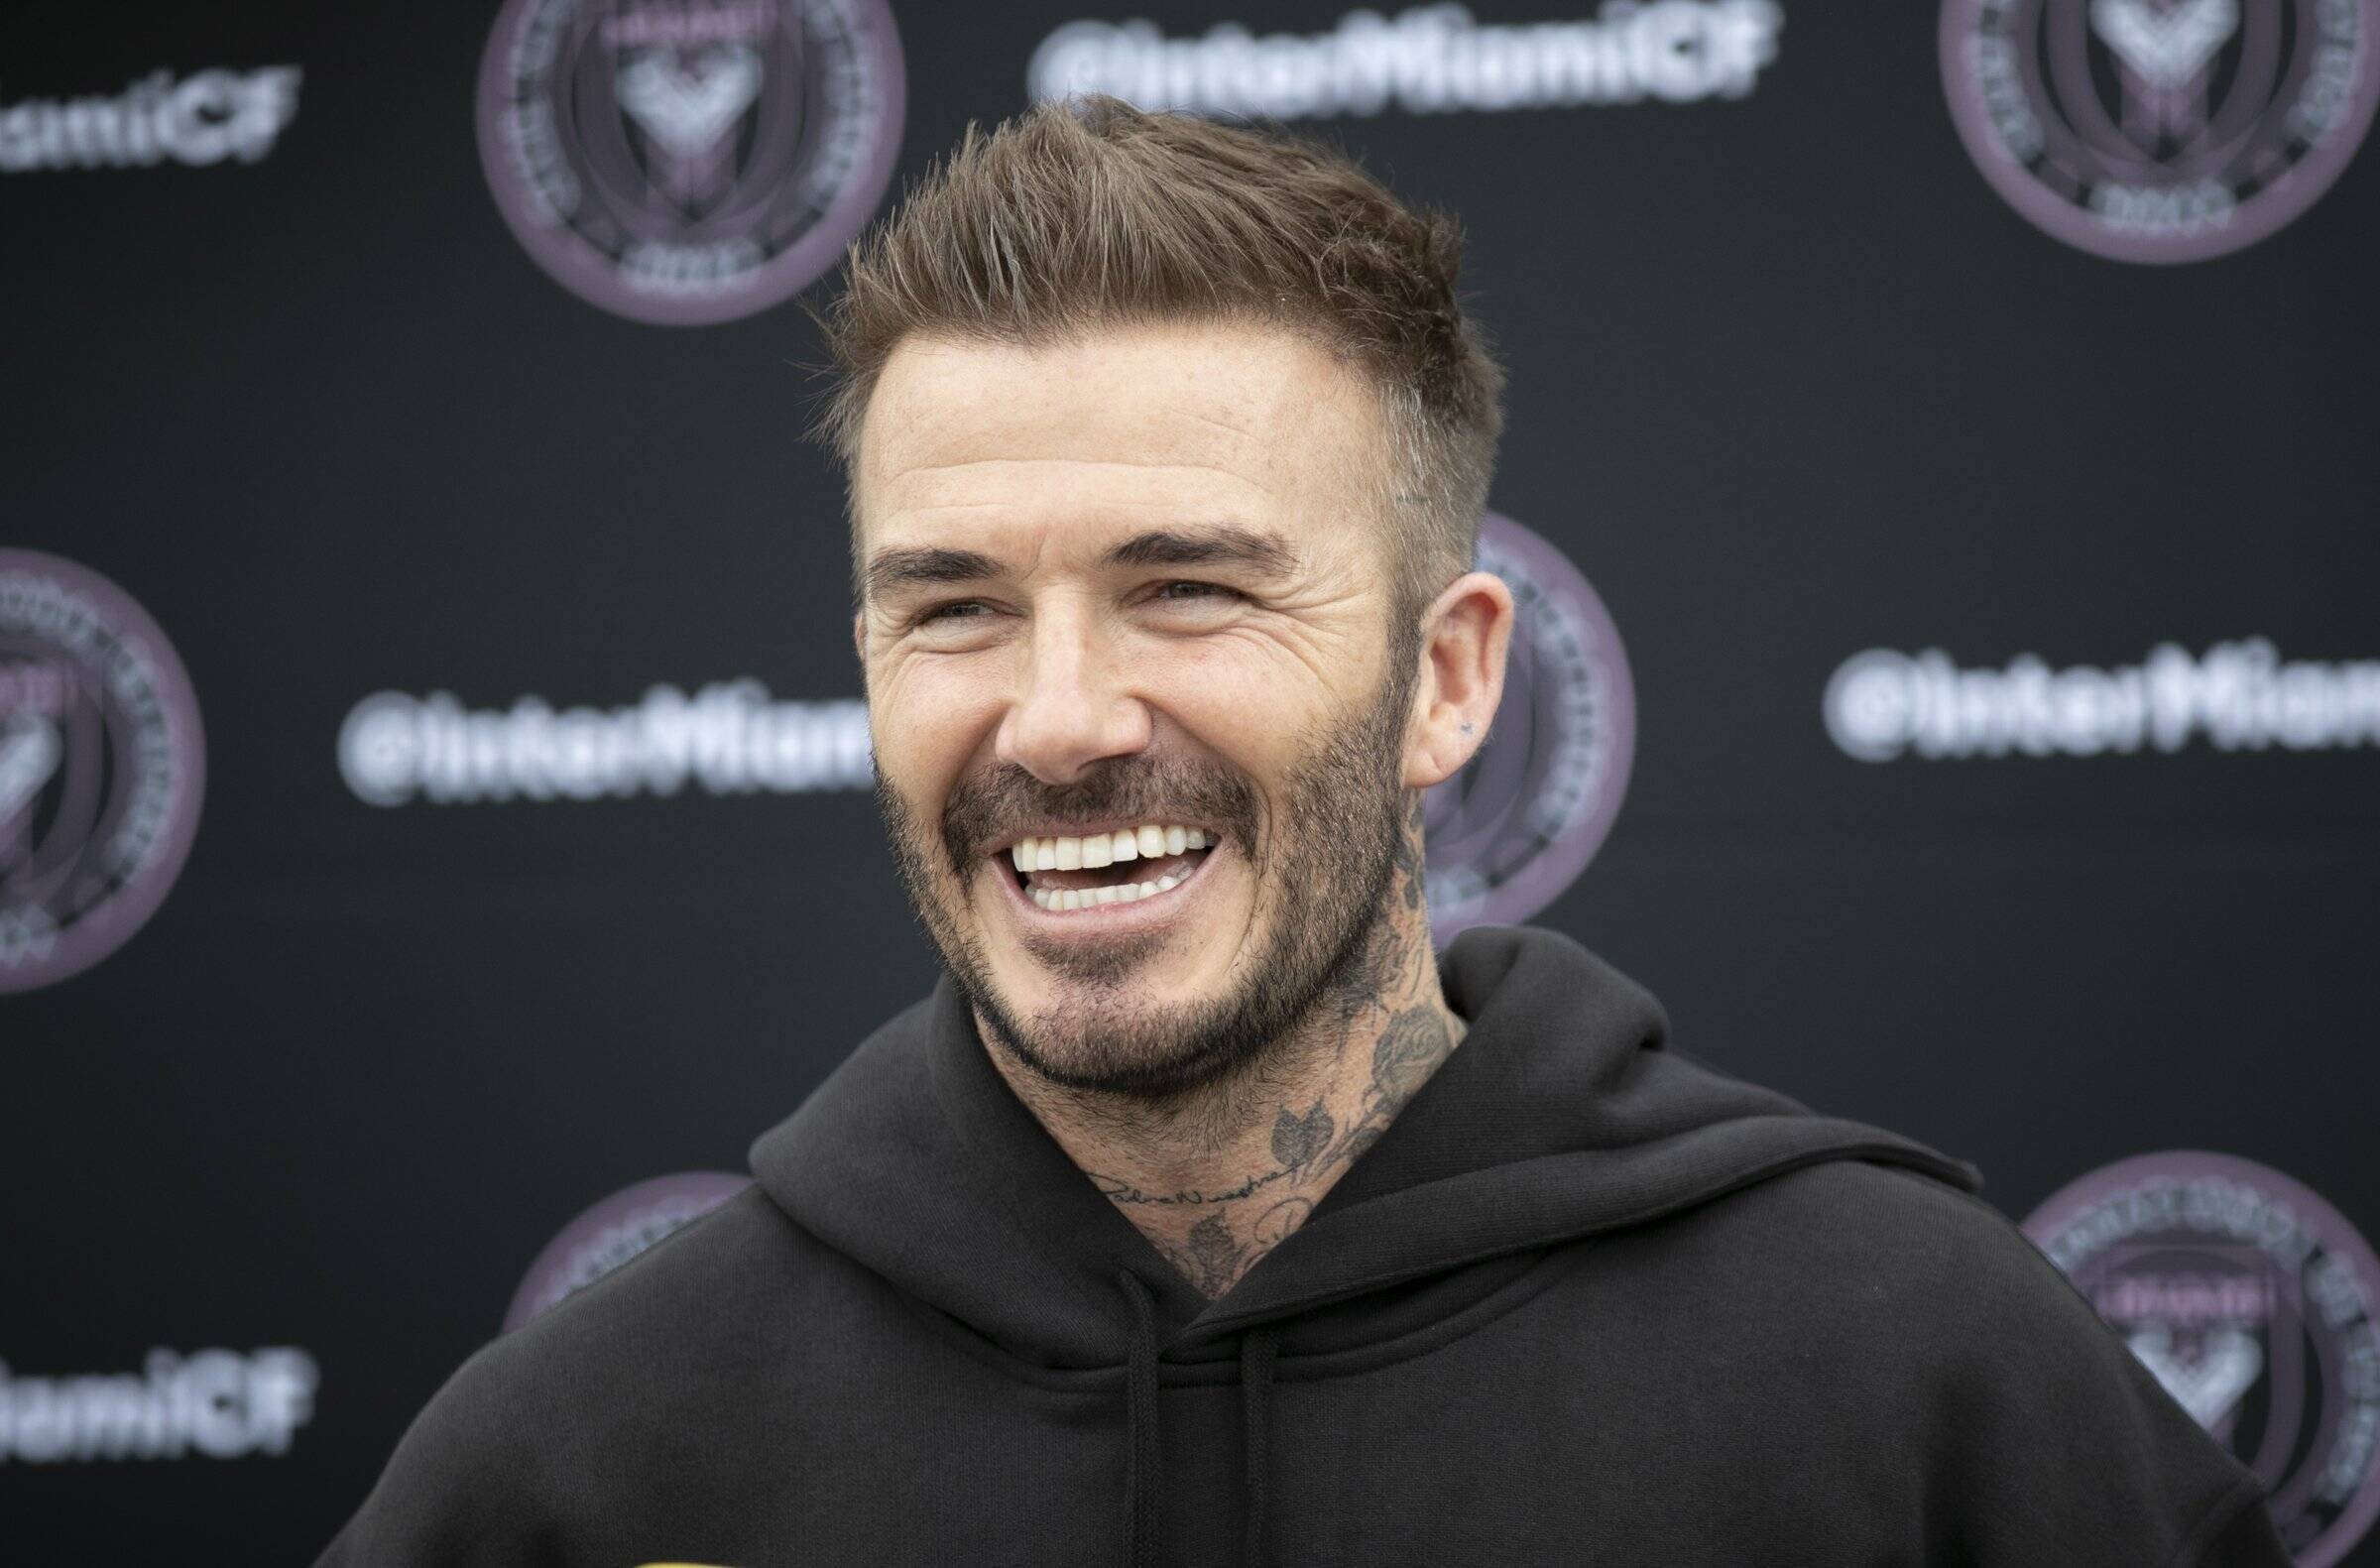 David Beckham heads to social media and provides his thoughts on European Super League